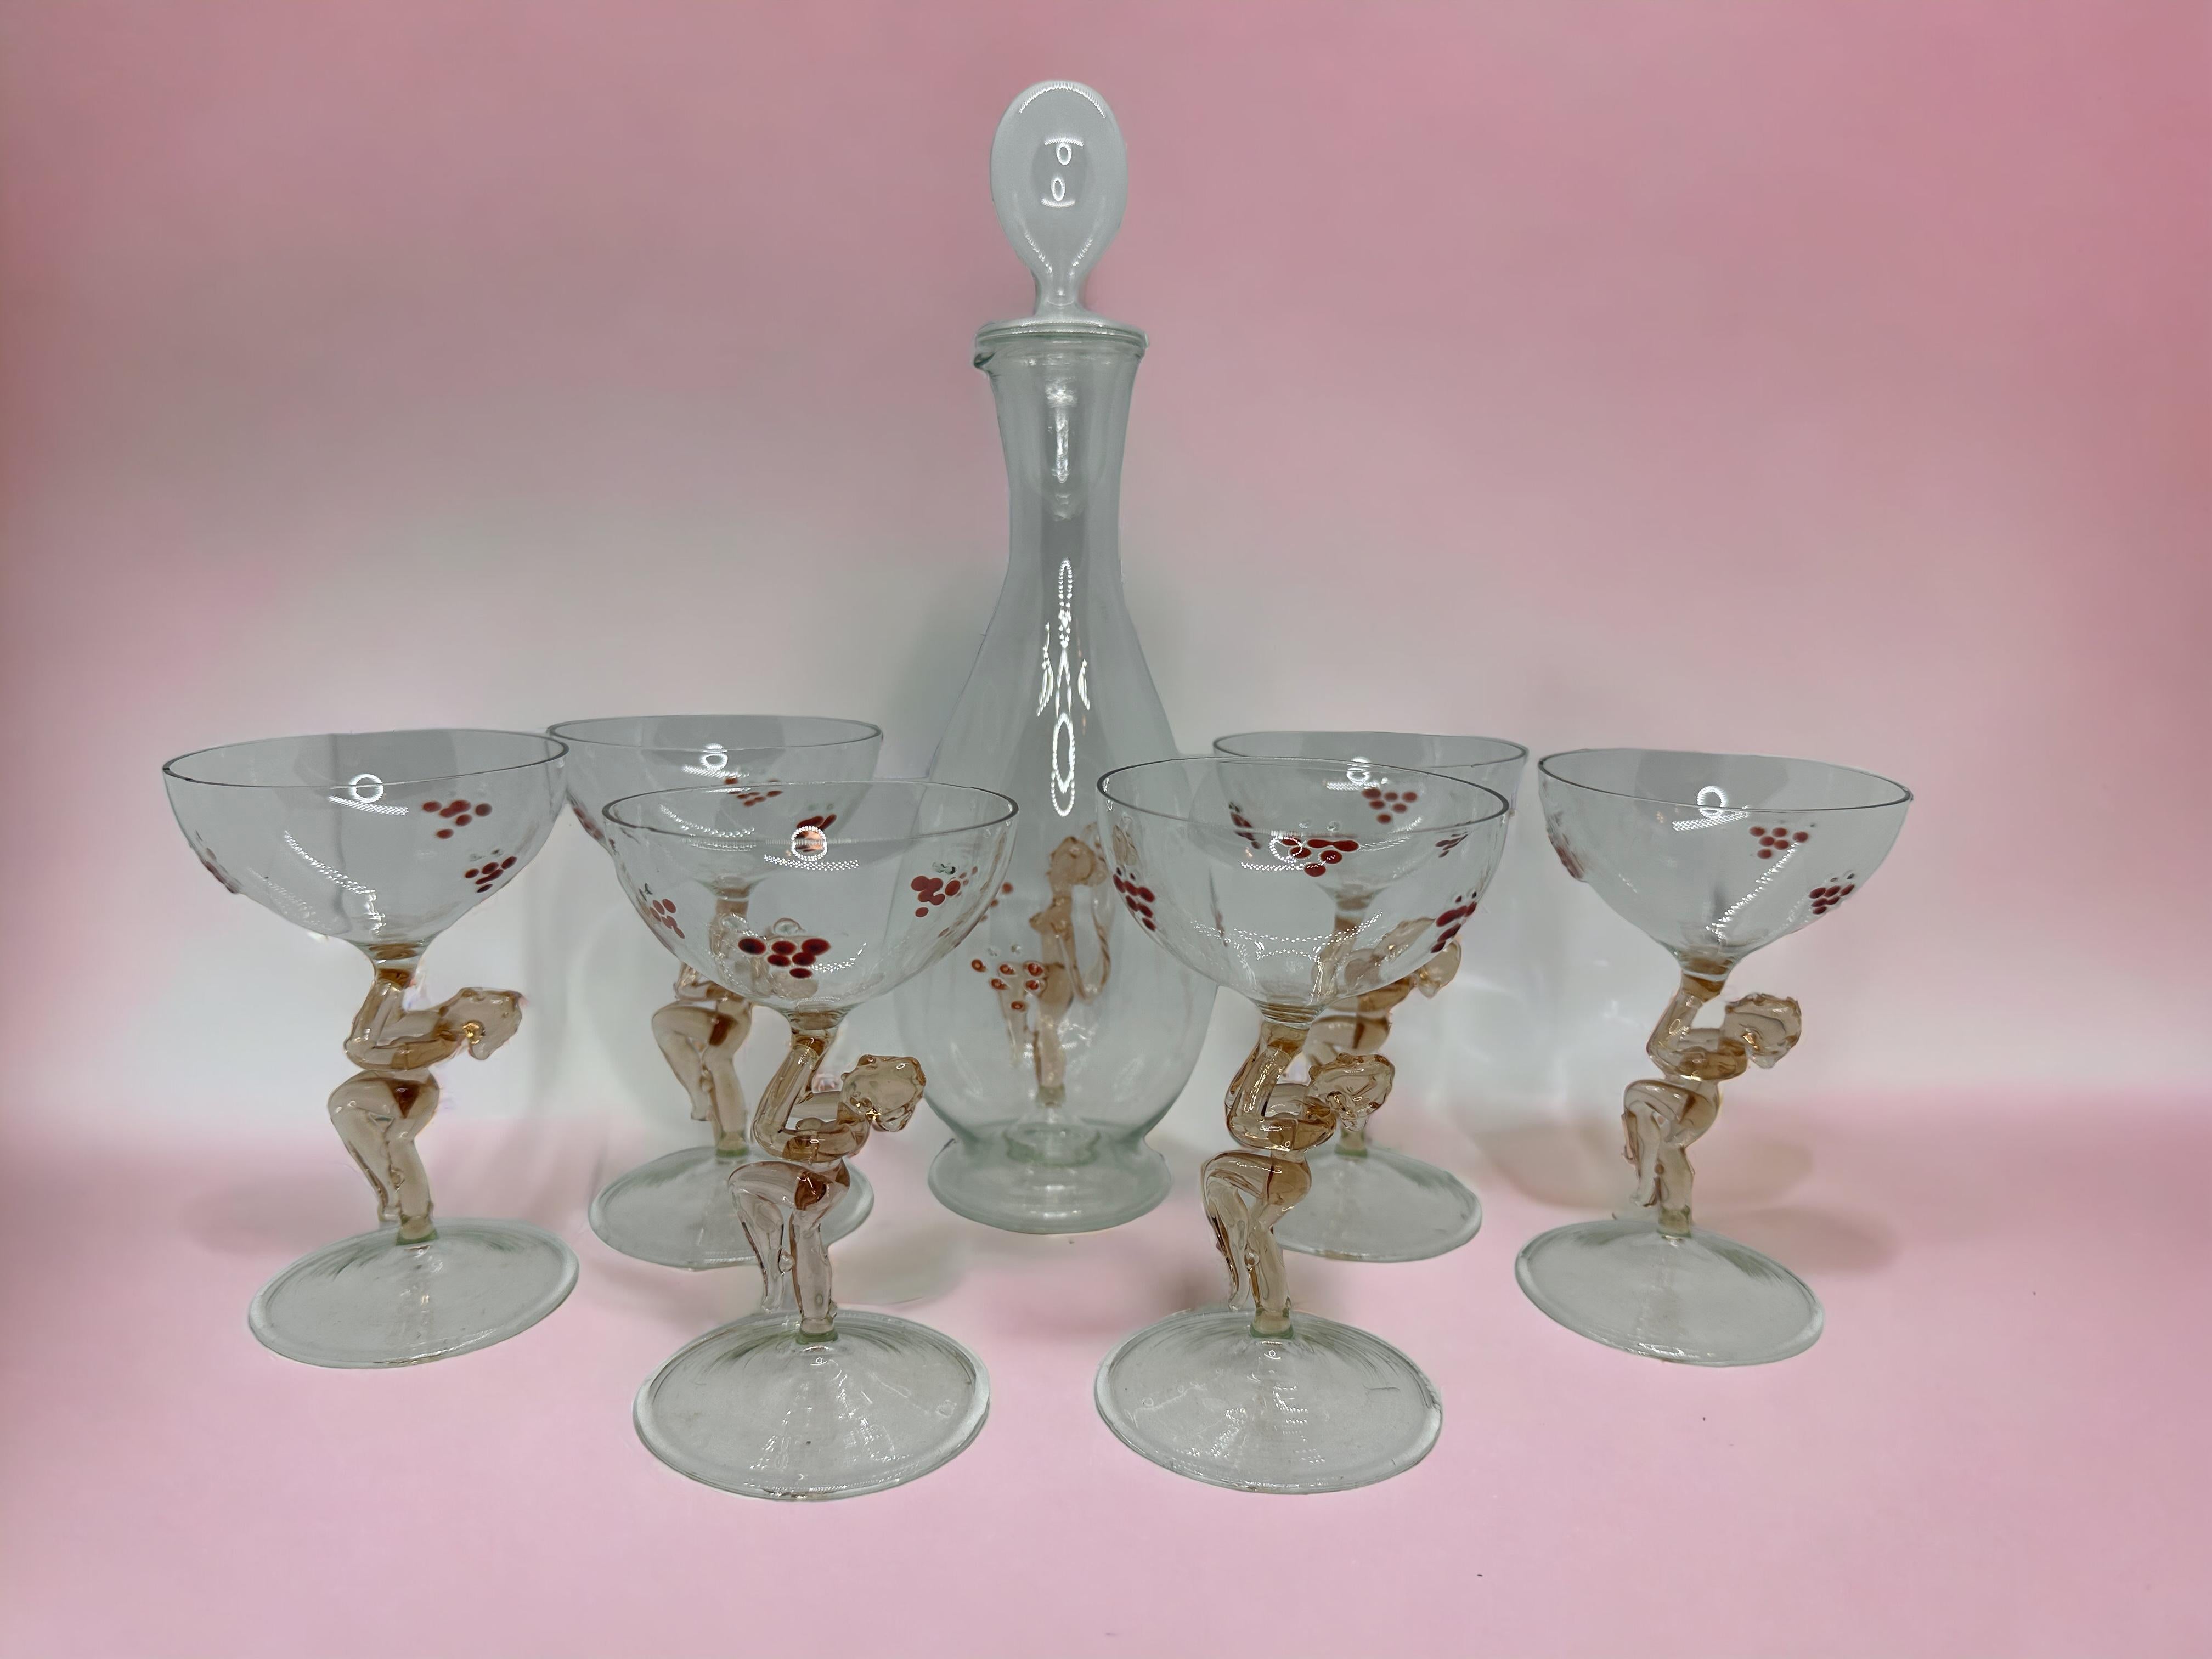 
A slightly cheeky Art Deco decanter set with matching set of six glasses in handblown clear glass, in the style of Bimini. The stems designed as nude ladies. In beautiful pastel colors. Very delicate to touch and amazing that something like this